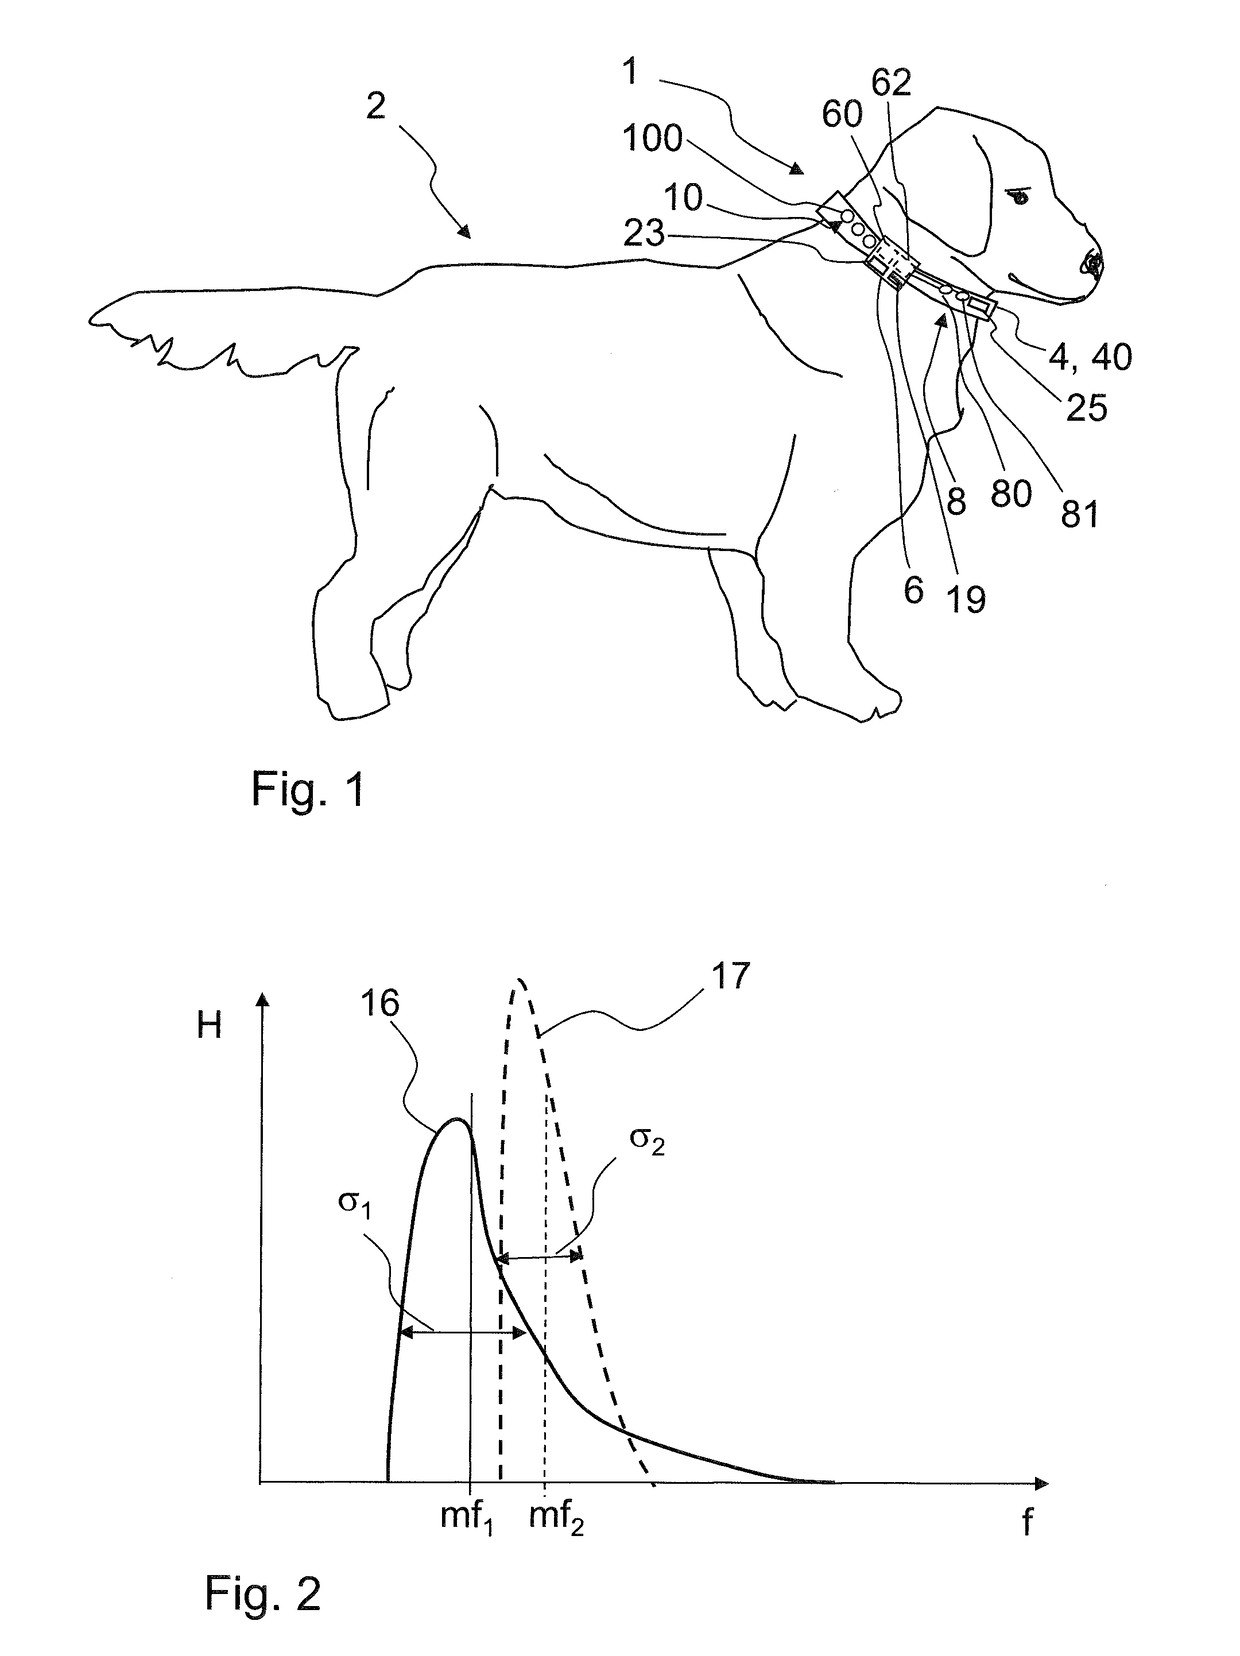 Monitoring device for animals